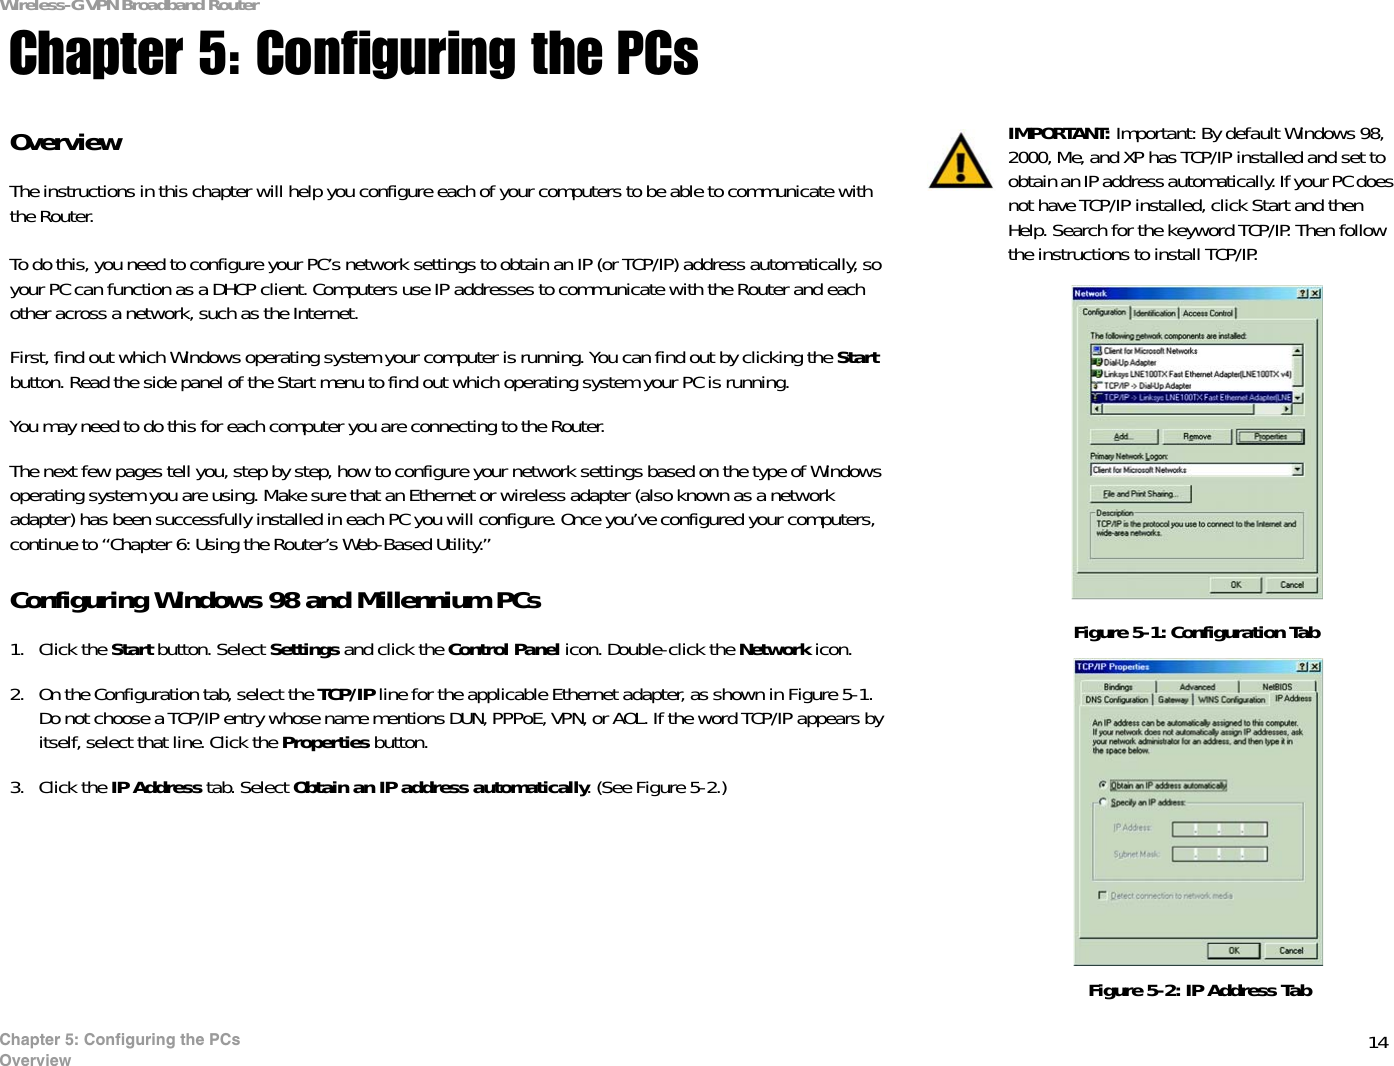 14Chapter 5: Configuring the PCsOverviewWireless-G VPN Broadband RouterChapter 5: Configuring the PCsOverviewThe instructions in this chapter will help you configure each of your computers to be able to communicate with the Router.To do this, you need to configure your PC’s network settings to obtain an IP (or TCP/IP) address automatically, so your PC can function as a DHCP client. Computers use IP addresses to communicate with the Router and each other across a network, such as the Internet. First, find out which Windows operating system your computer is running. You can find out by clicking the Start button. Read the side panel of the Start menu to find out which operating system your PC is running.You may need to do this for each computer you are connecting to the Router.The next few pages tell you, step by step, how to configure your network settings based on the type of Windows operating system you are using. Make sure that an Ethernet or wireless adapter (also known as a network adapter) has been successfully installed in each PC you will configure. Once you’ve configured your computers, continue to “Chapter 6: Using the Router’s Web-Based Utility.”Configuring Windows 98 and Millennium PCs1. Click the Start button. Select Settings and click the Control Panel icon. Double-click the Network icon.2. On the Configuration tab, select the TCP/IP line for the applicable Ethernet adapter, as shown in Figure 5-1. Do not choose a TCP/IP entry whose name mentions DUN, PPPoE, VPN, or AOL. If the word TCP/IP appears by itself, select that line. Click the Properties button.3. Click the IP Address tab. Select Obtain an IP address automatically. (See Figure 5-2.)IMPORTANT: Important: By default Windows 98, 2000, Me, and XP has TCP/IP installed and set to obtain an IP address automatically. If your PC does not have TCP/IP installed, click Start and then Help. Search for the keyword TCP/IP. Then follow the instructions to install TCP/IP.Figure 5-1: Configuration TabFigure 5-2: IP Address Tab